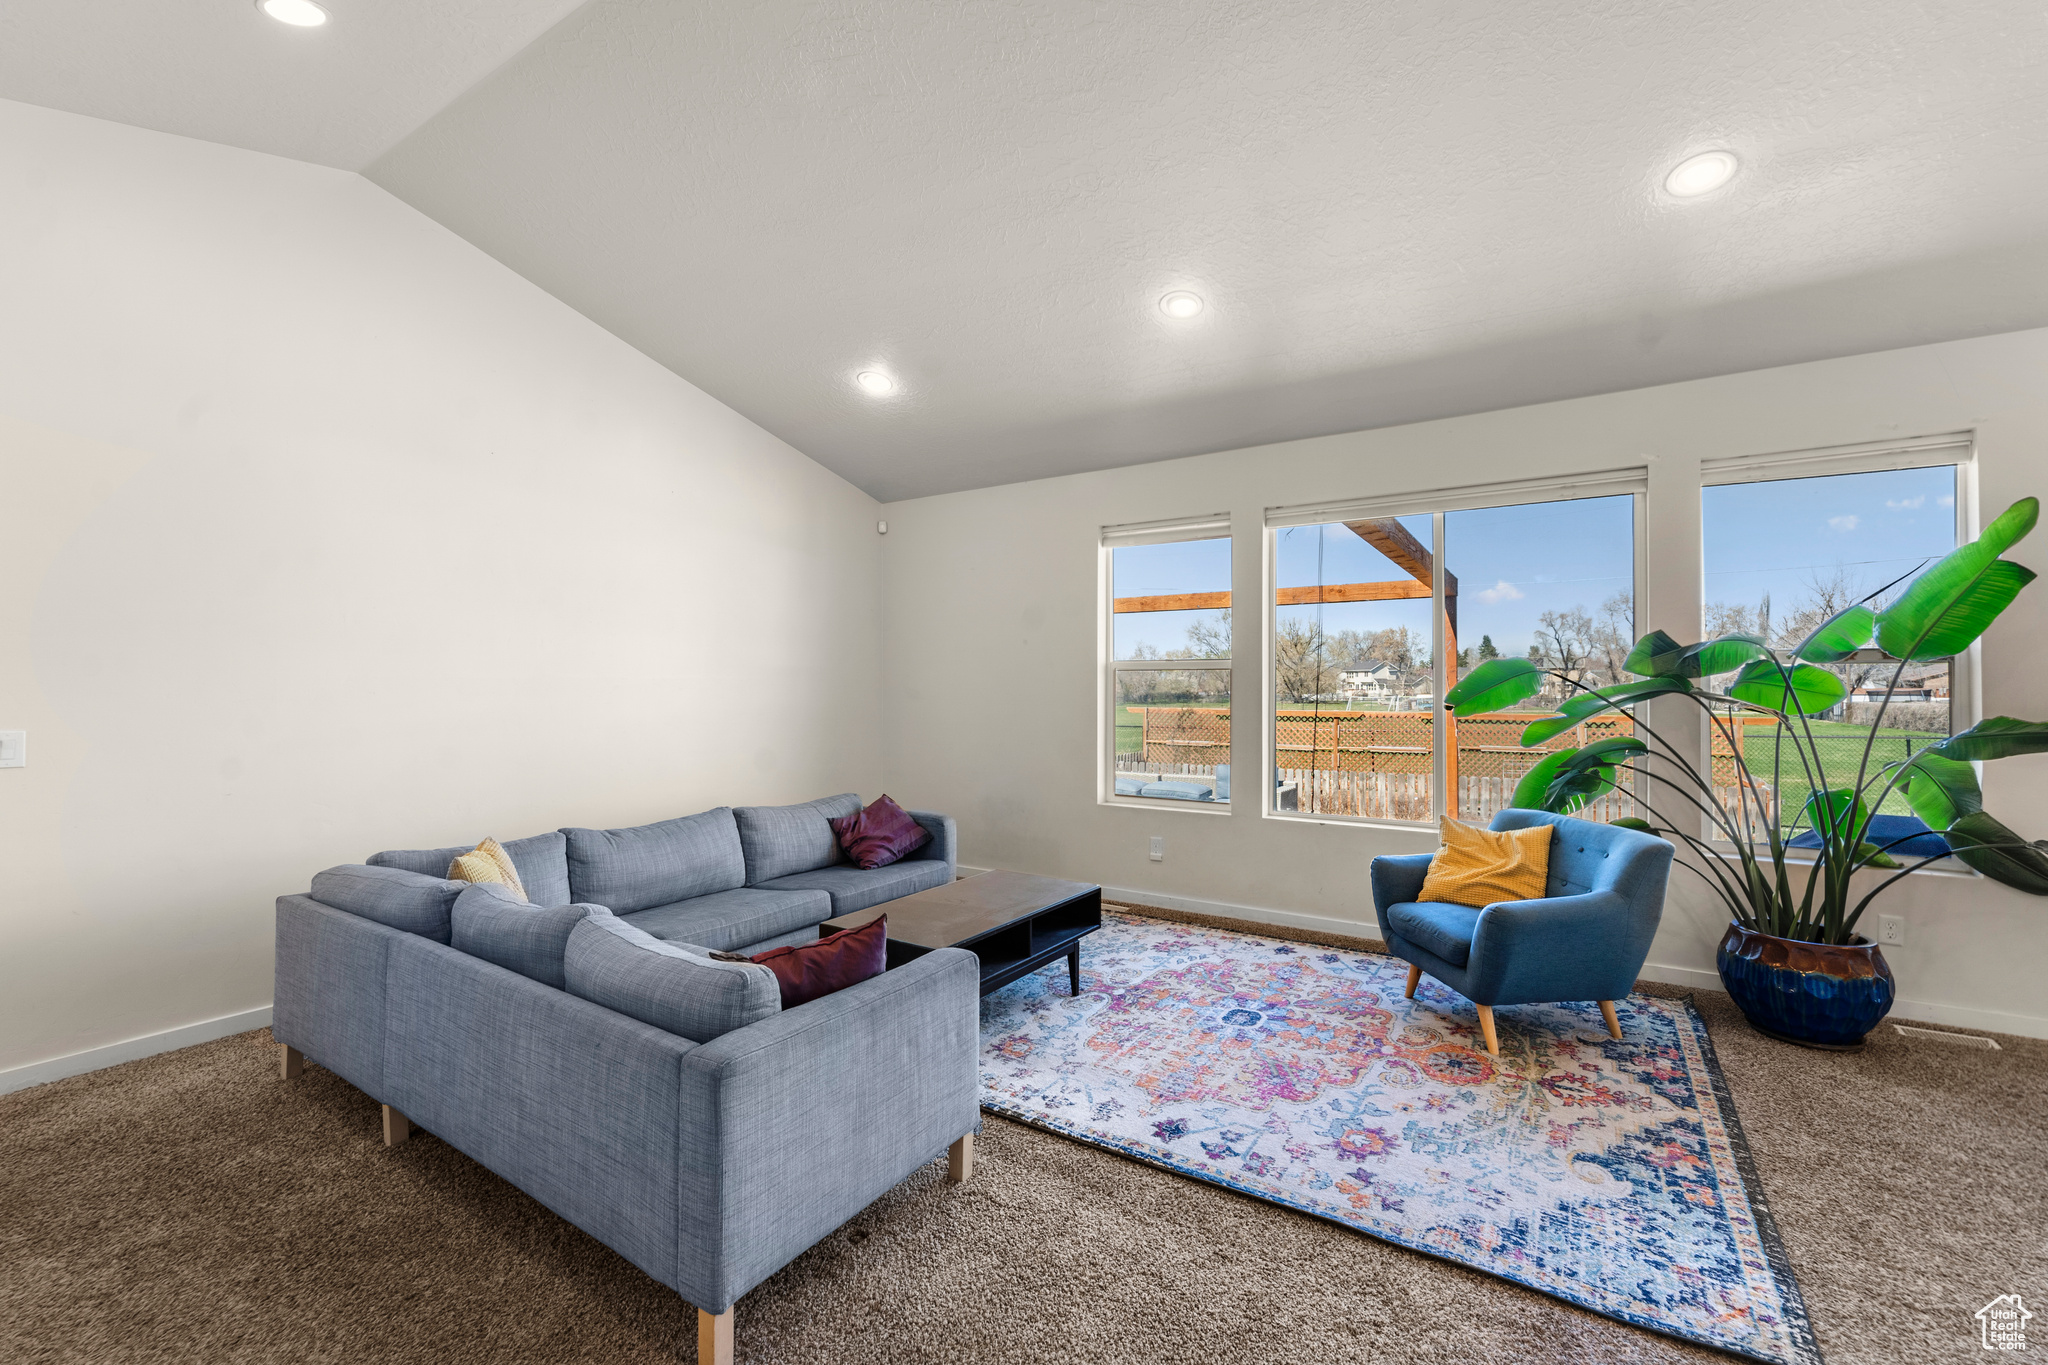 Carpeted living room with lofted ceiling